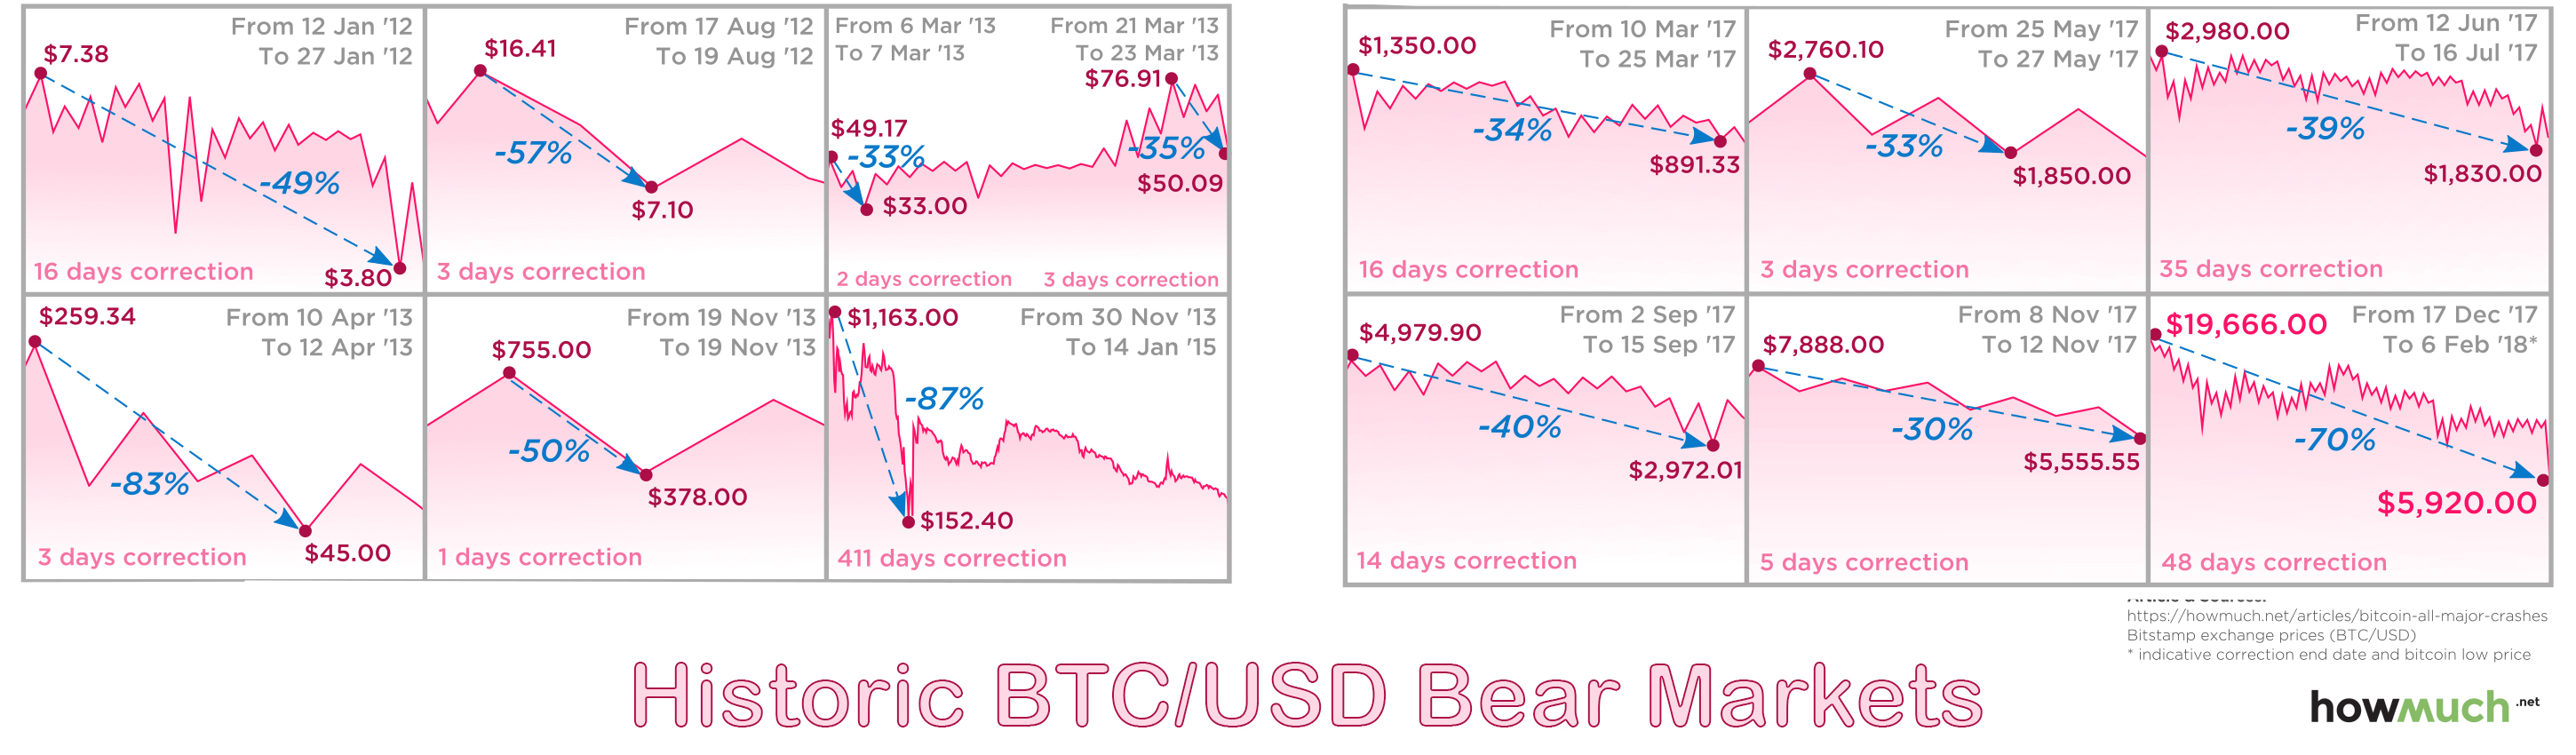 The 2018 Crypto-Bear Market Less Severe Than 2014, At Least for Now